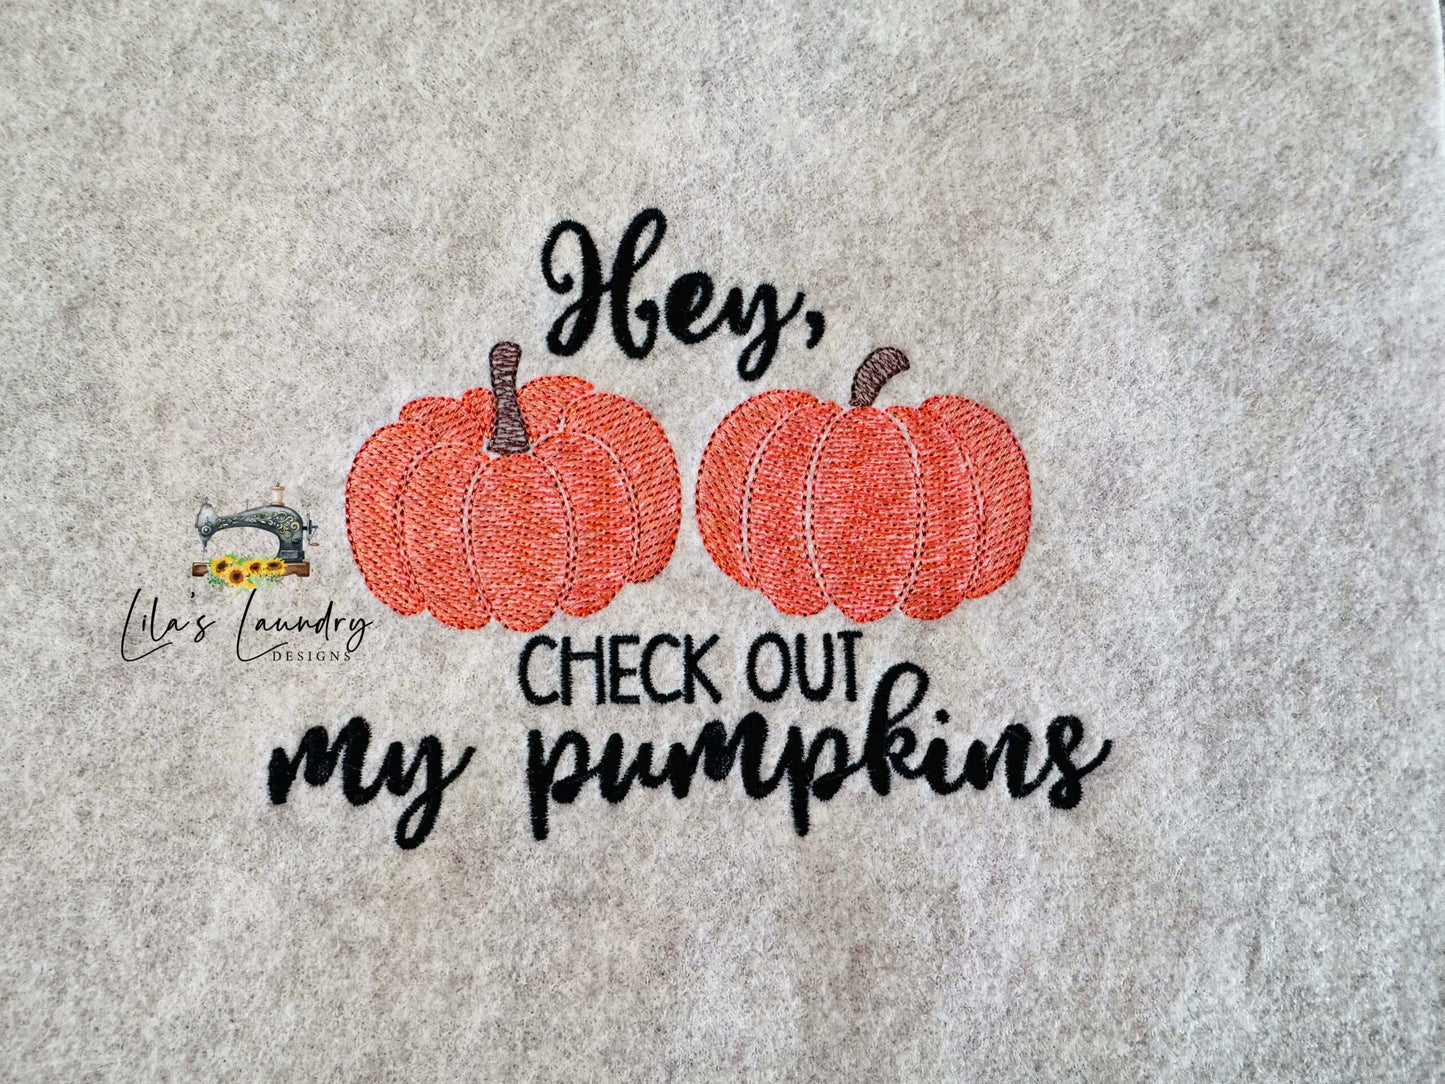 Check Out My Pumpkins Sketch - 3 sizes- Digital Embroidery Design